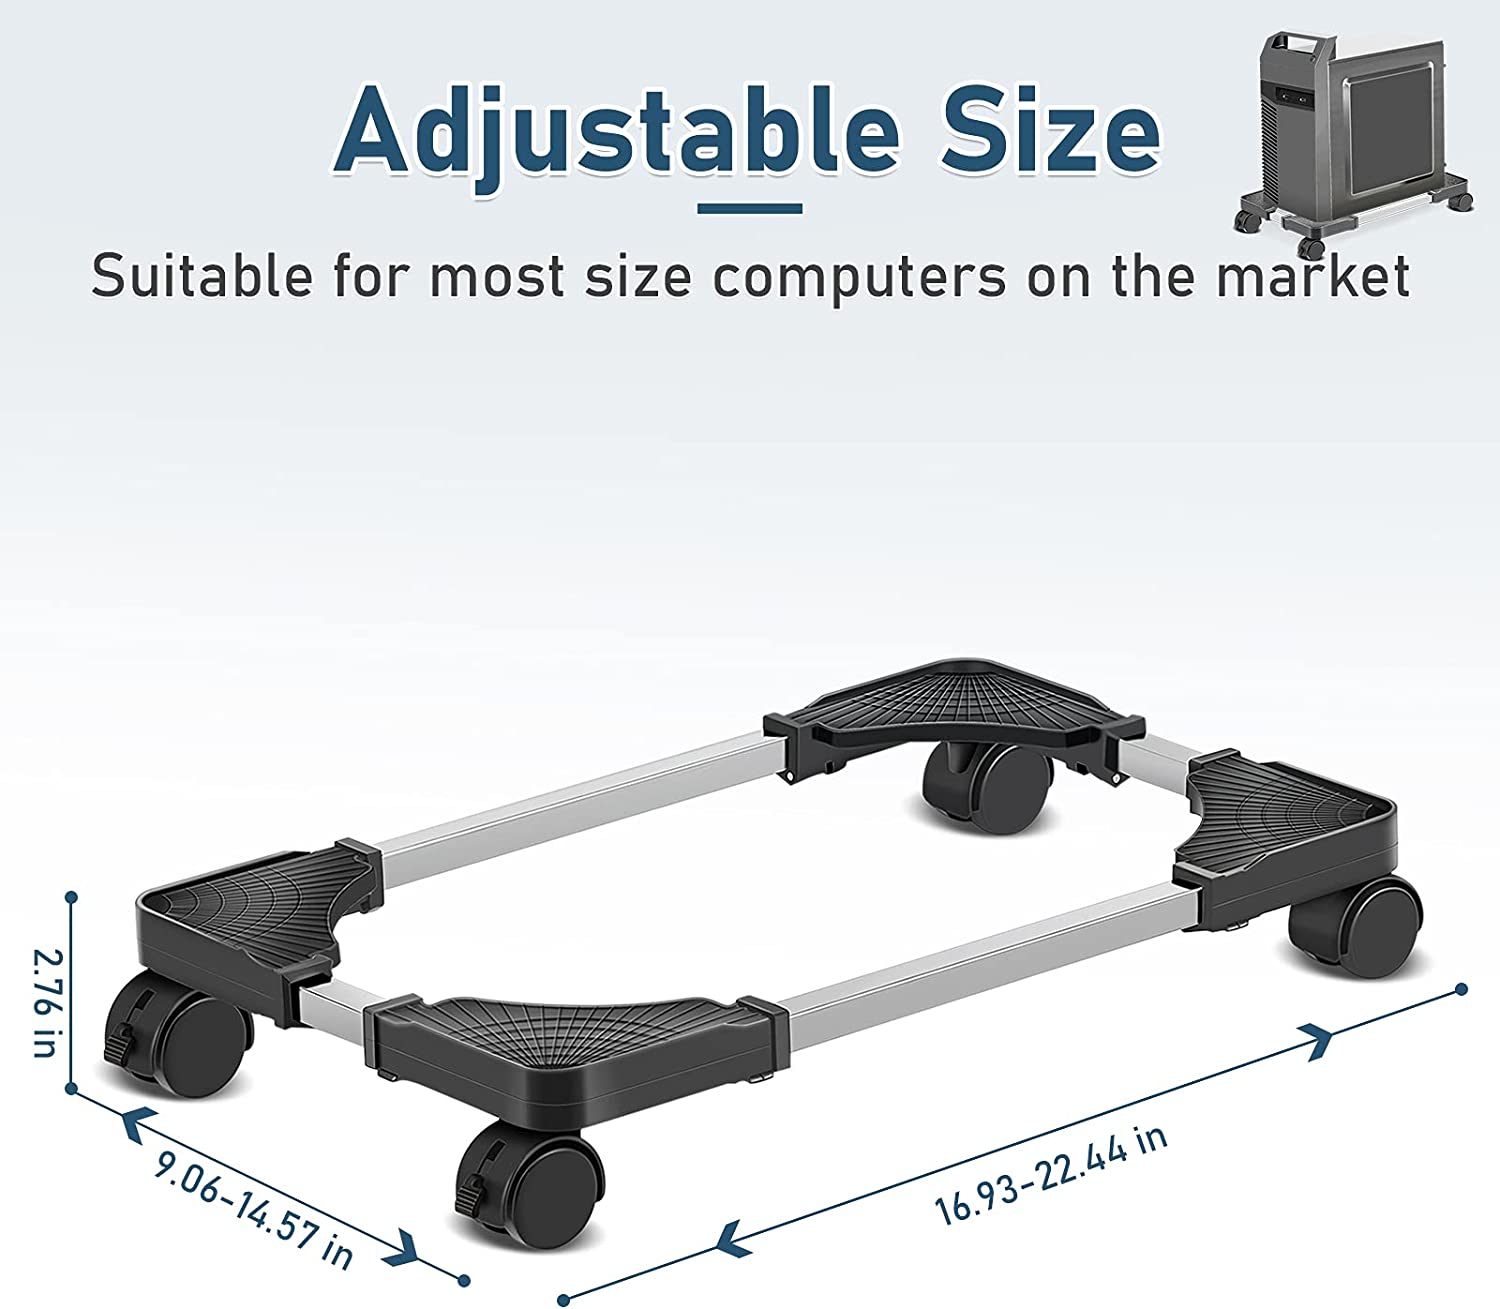 Computer-Accessories-PC-Stand-with-Casters-5-Wheel-Mobile-Desktop-Tower-Computer-Floor-Stand-Adjustable-Width-from-6-11-Inches-Computer-Mainframe-Tray-Holder-Chassis-Stand-24